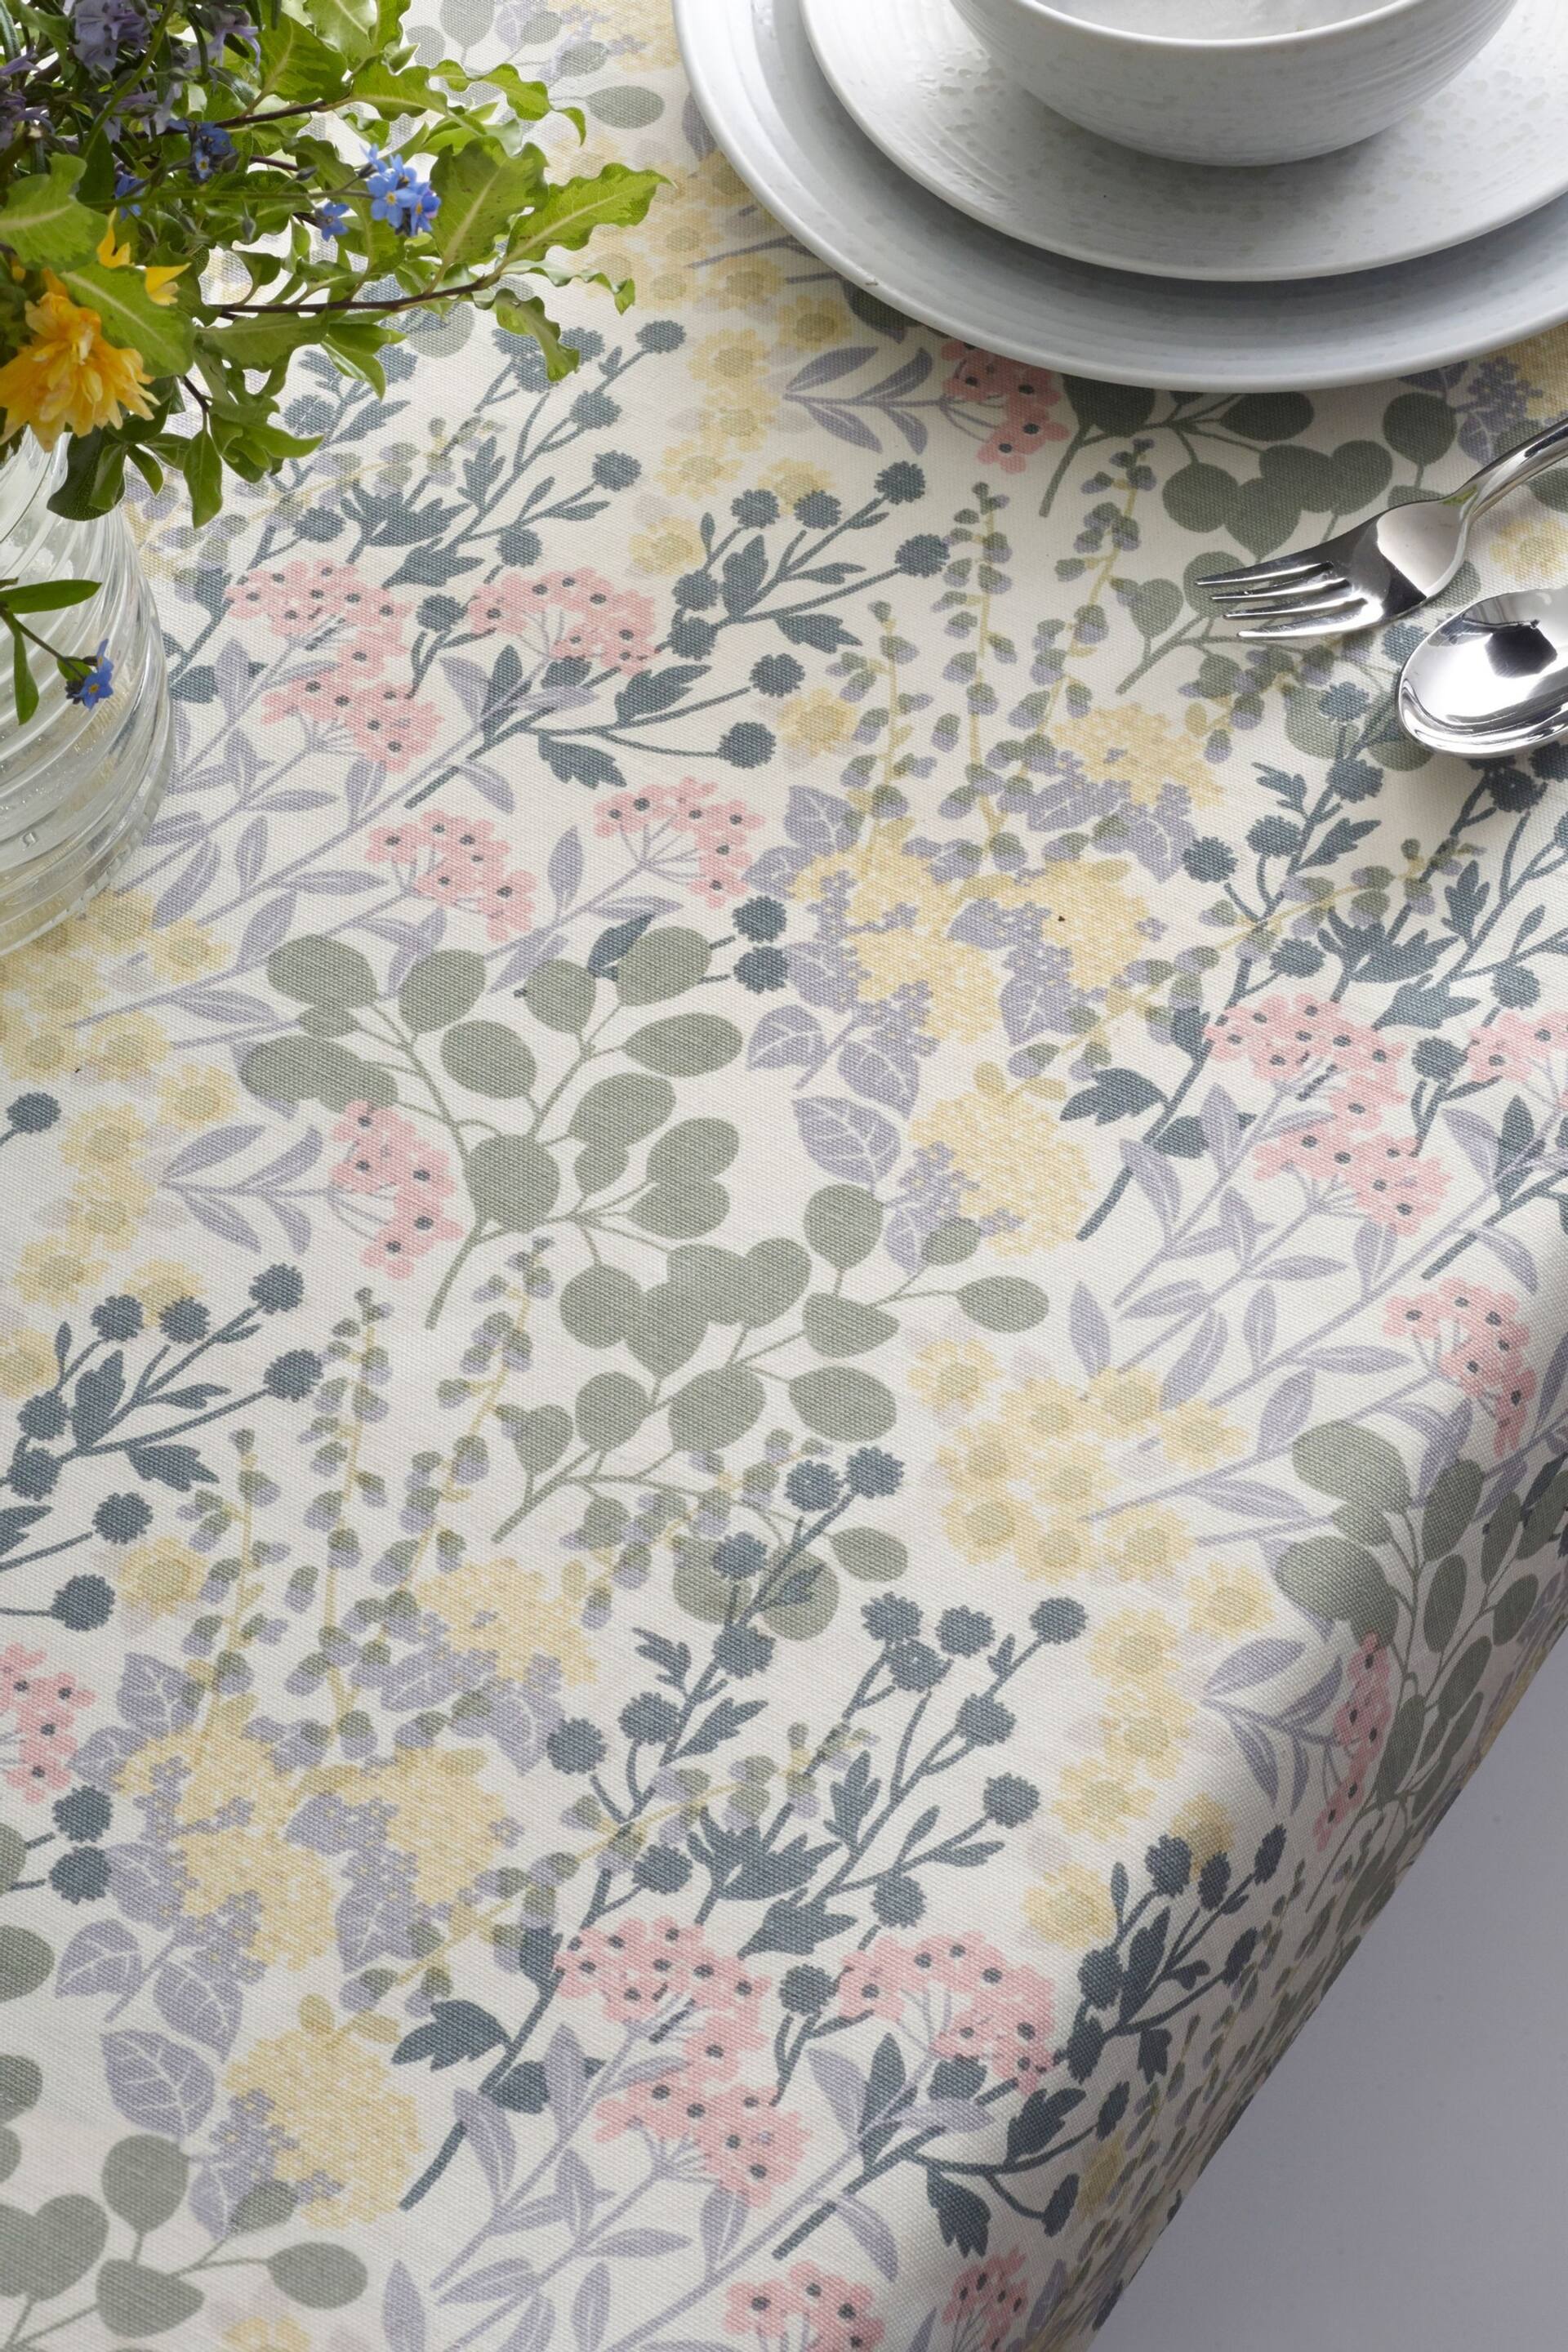 Nordic Esme Floral Wipe Clean Table Cloth With Linen - Image 1 of 3